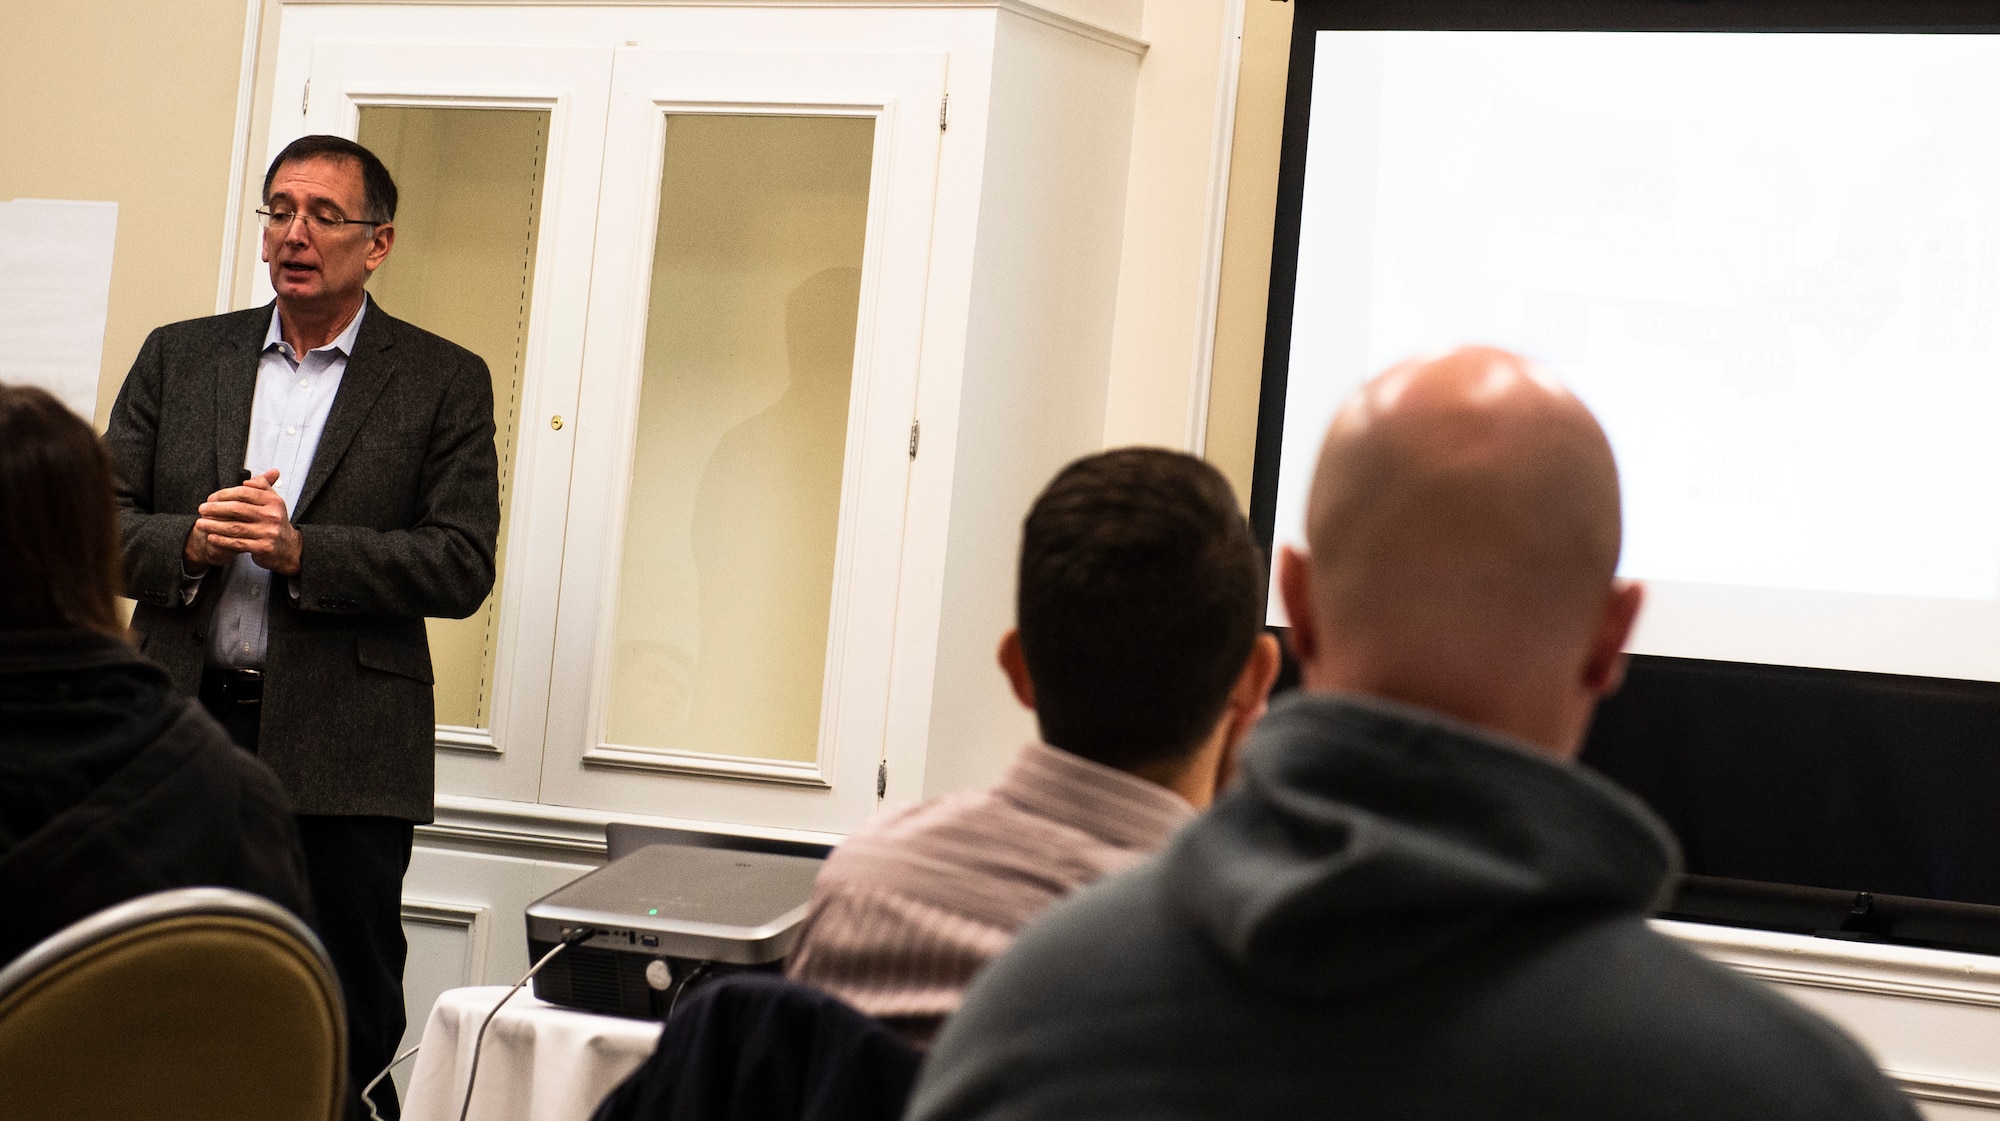 Dave Charron, University of California, Berkeley, MD5 lecturer, speaks with Airmen during an MD5 Boot Camp at the 20th Forces Support Squadron Carolina Skies Club and Conference Center at Shaw Air Force Base, S.C., March 19, 2019.